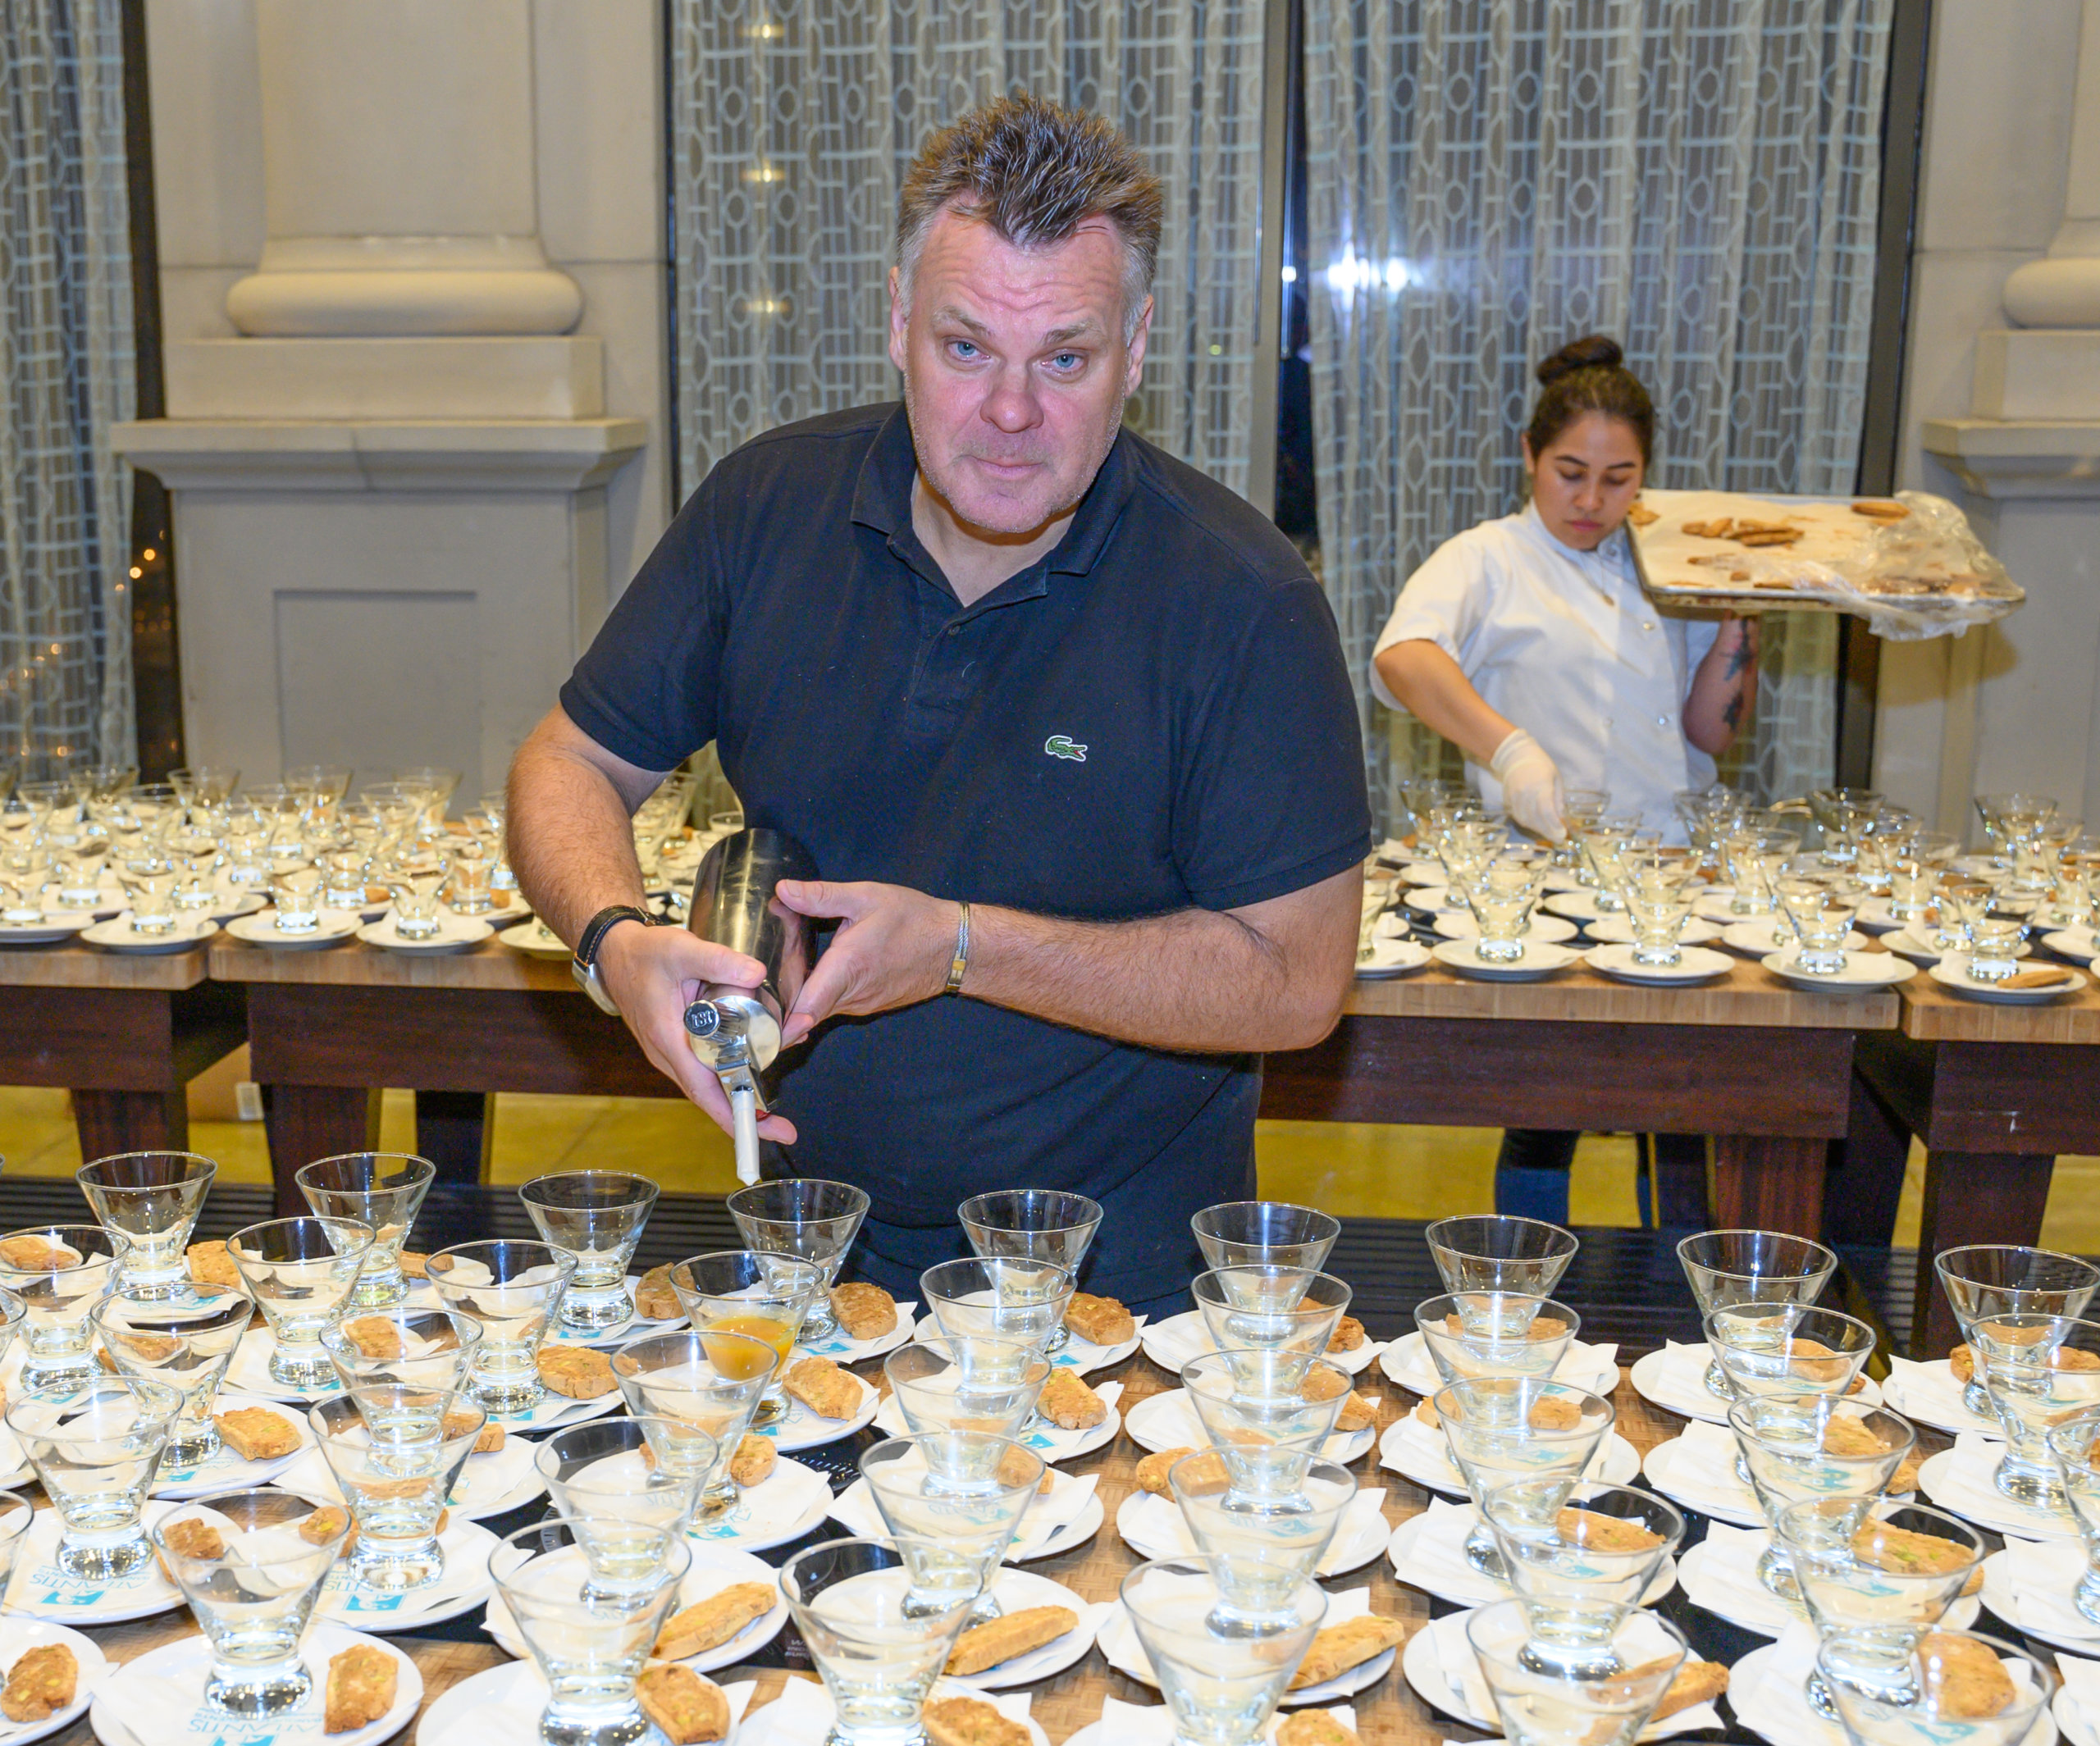 Chef François Payard preparing the night's desserts: Hot and Cold Piña Colada Shooters at chefs of the north fork